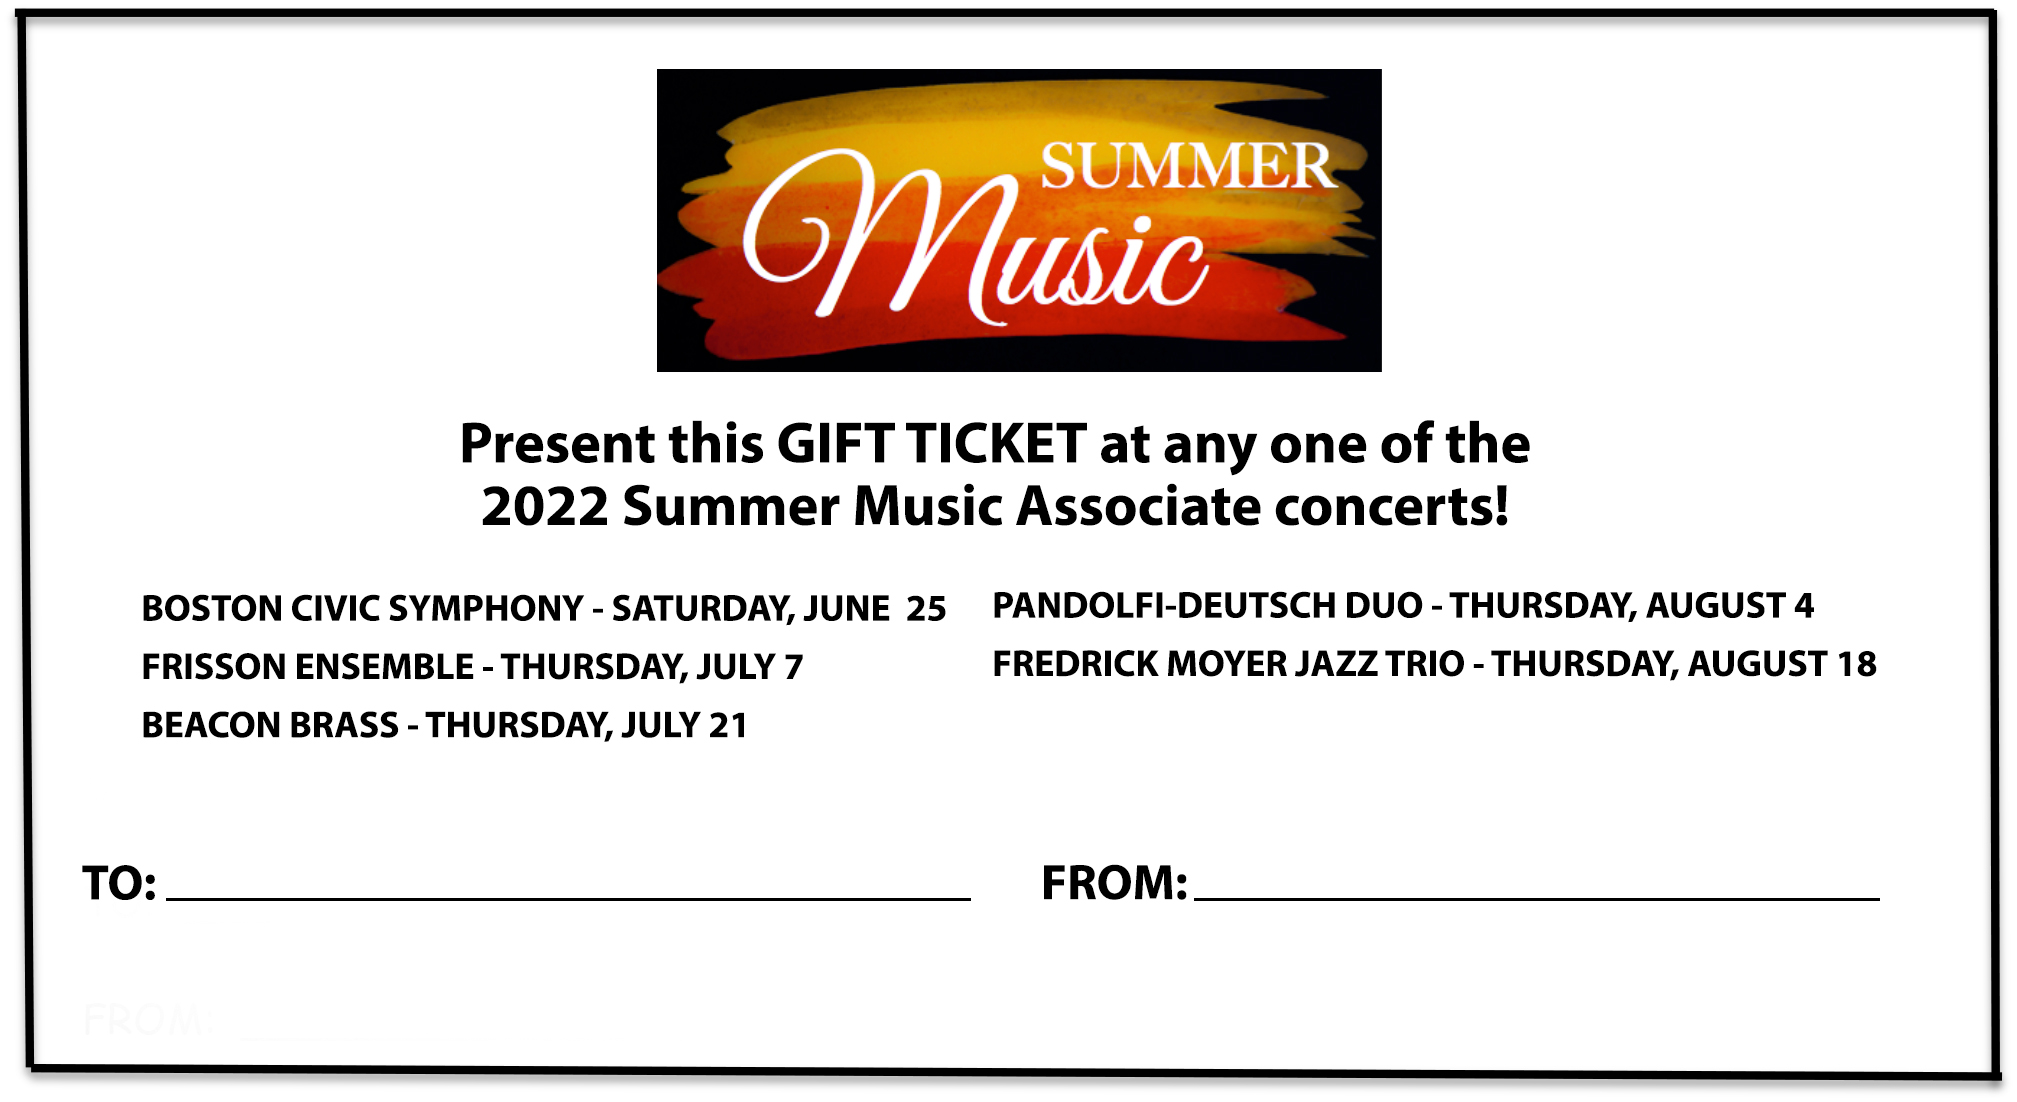 Microsoft Word - Gift ticket graphic.docx